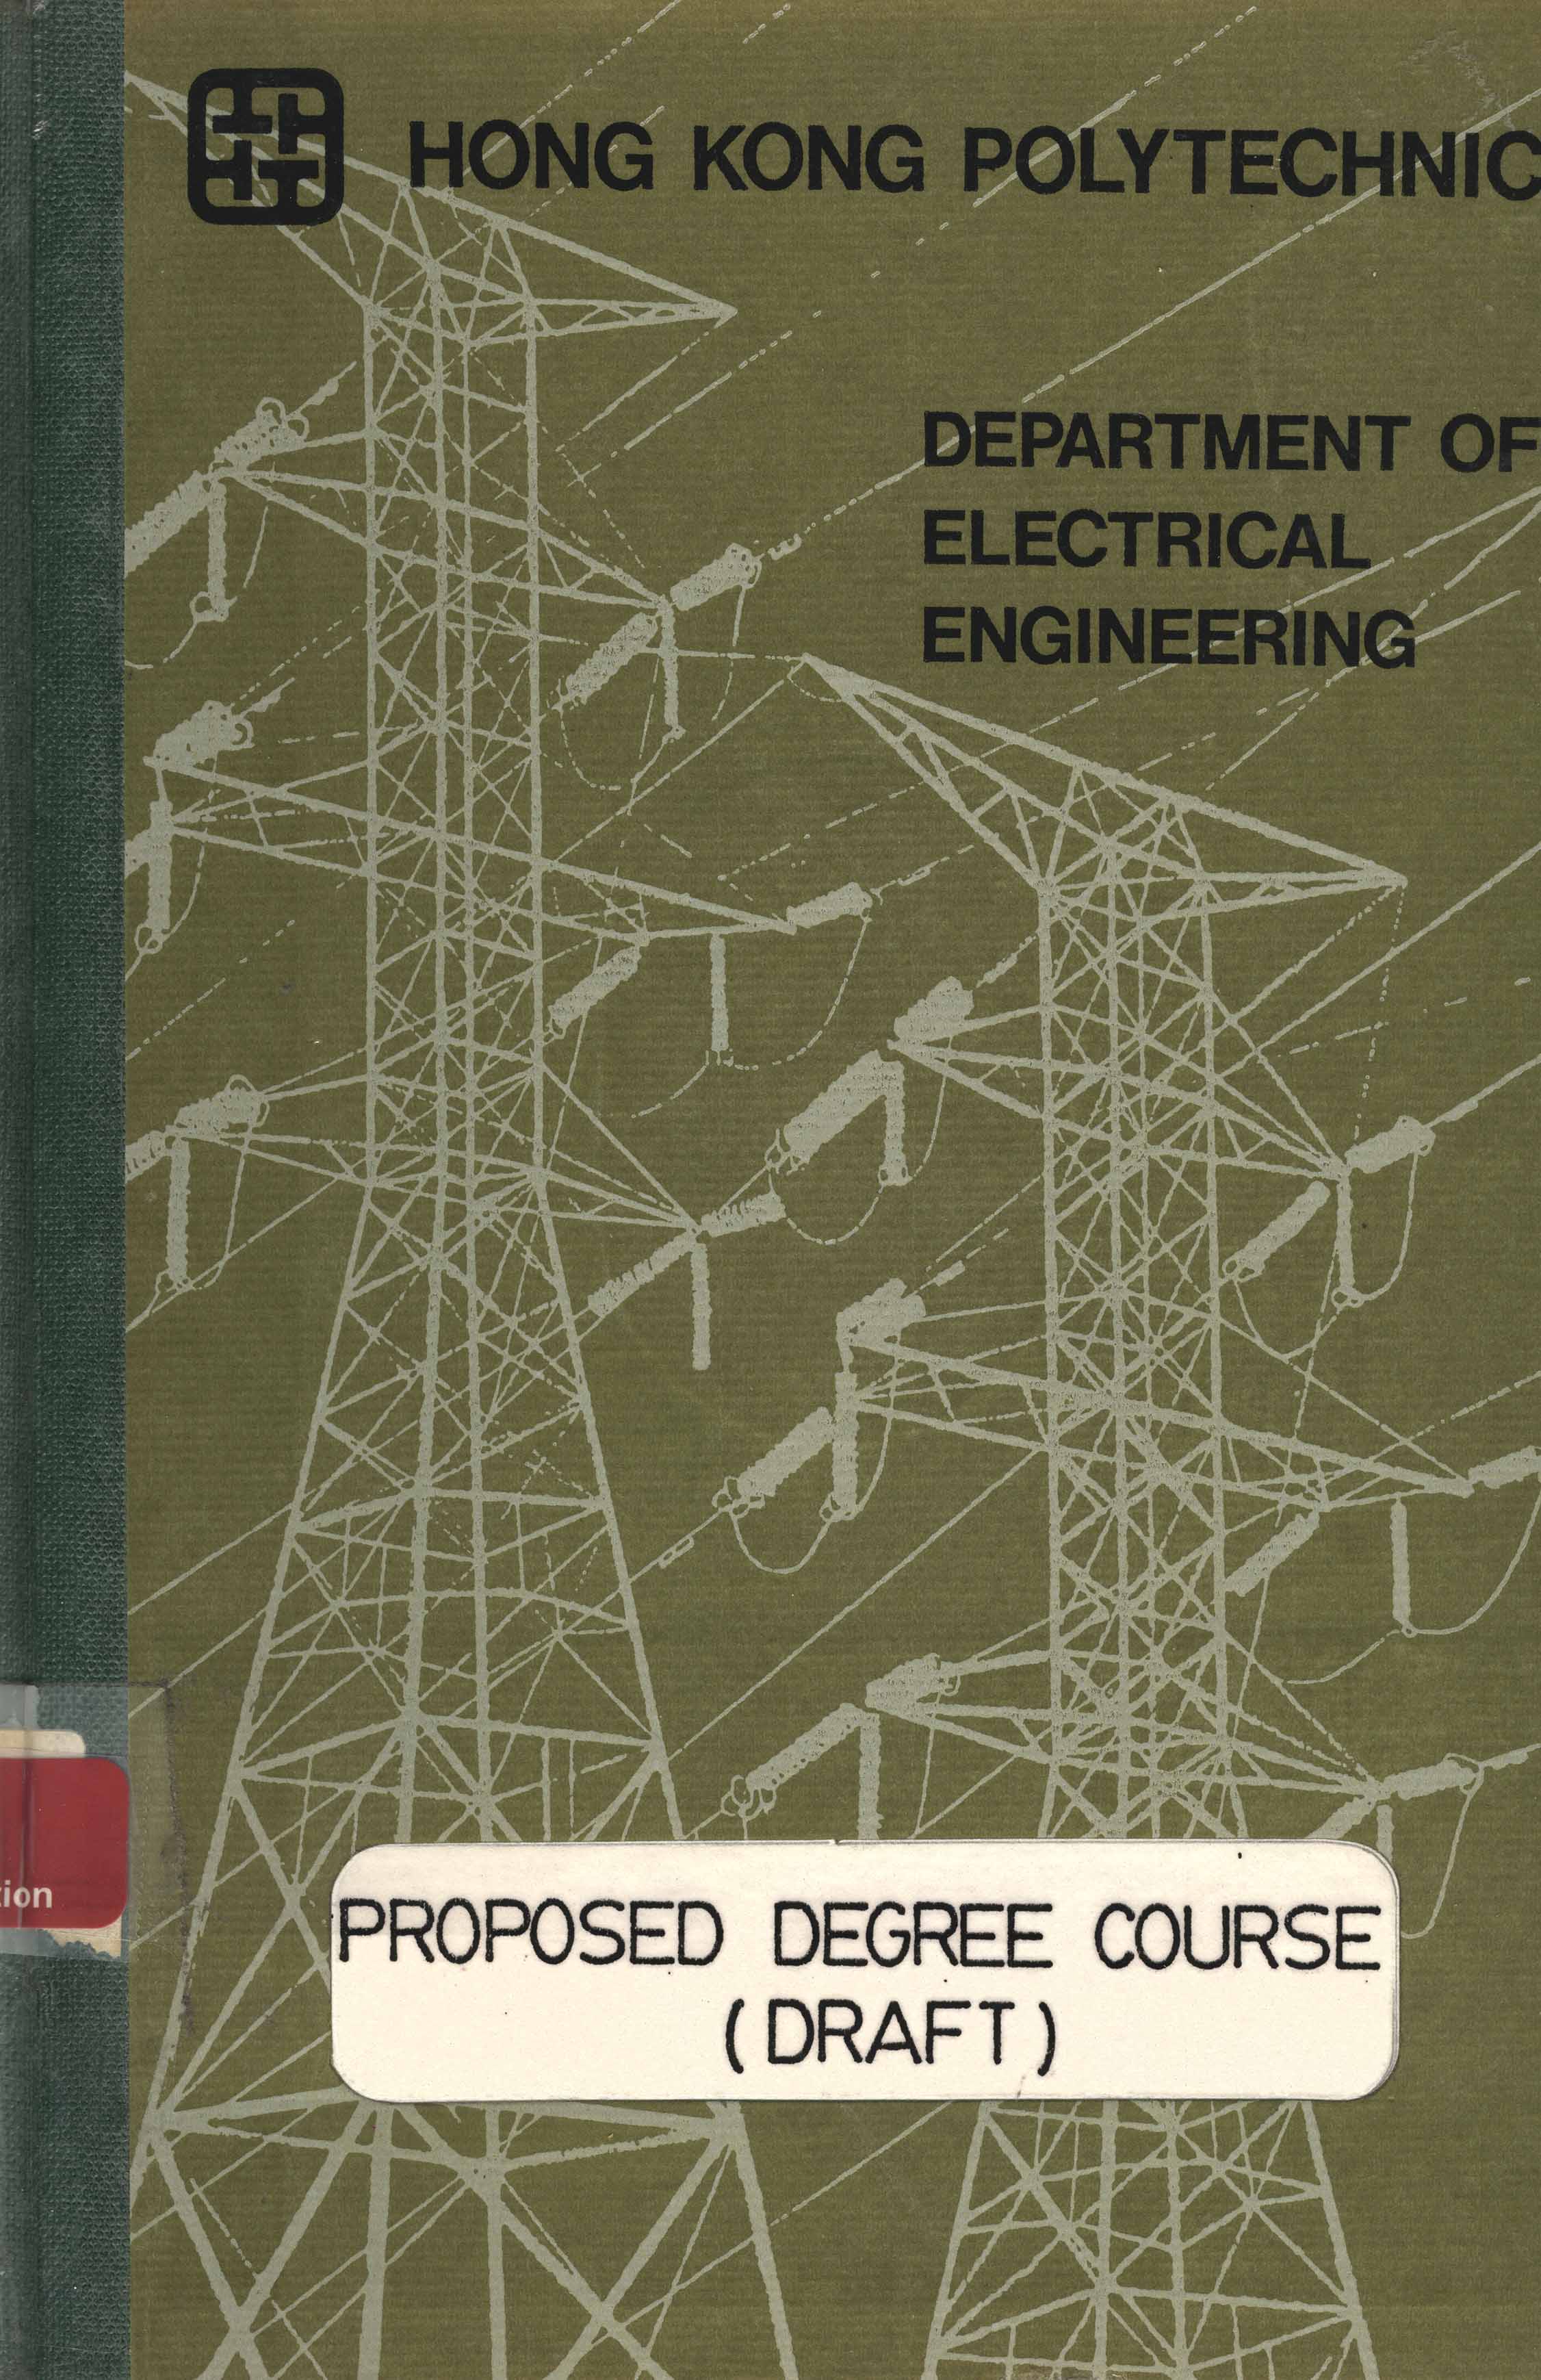 Hong Kong Polytechnic. Dept. of Electrical Engineering. Proposed degree course (draft)